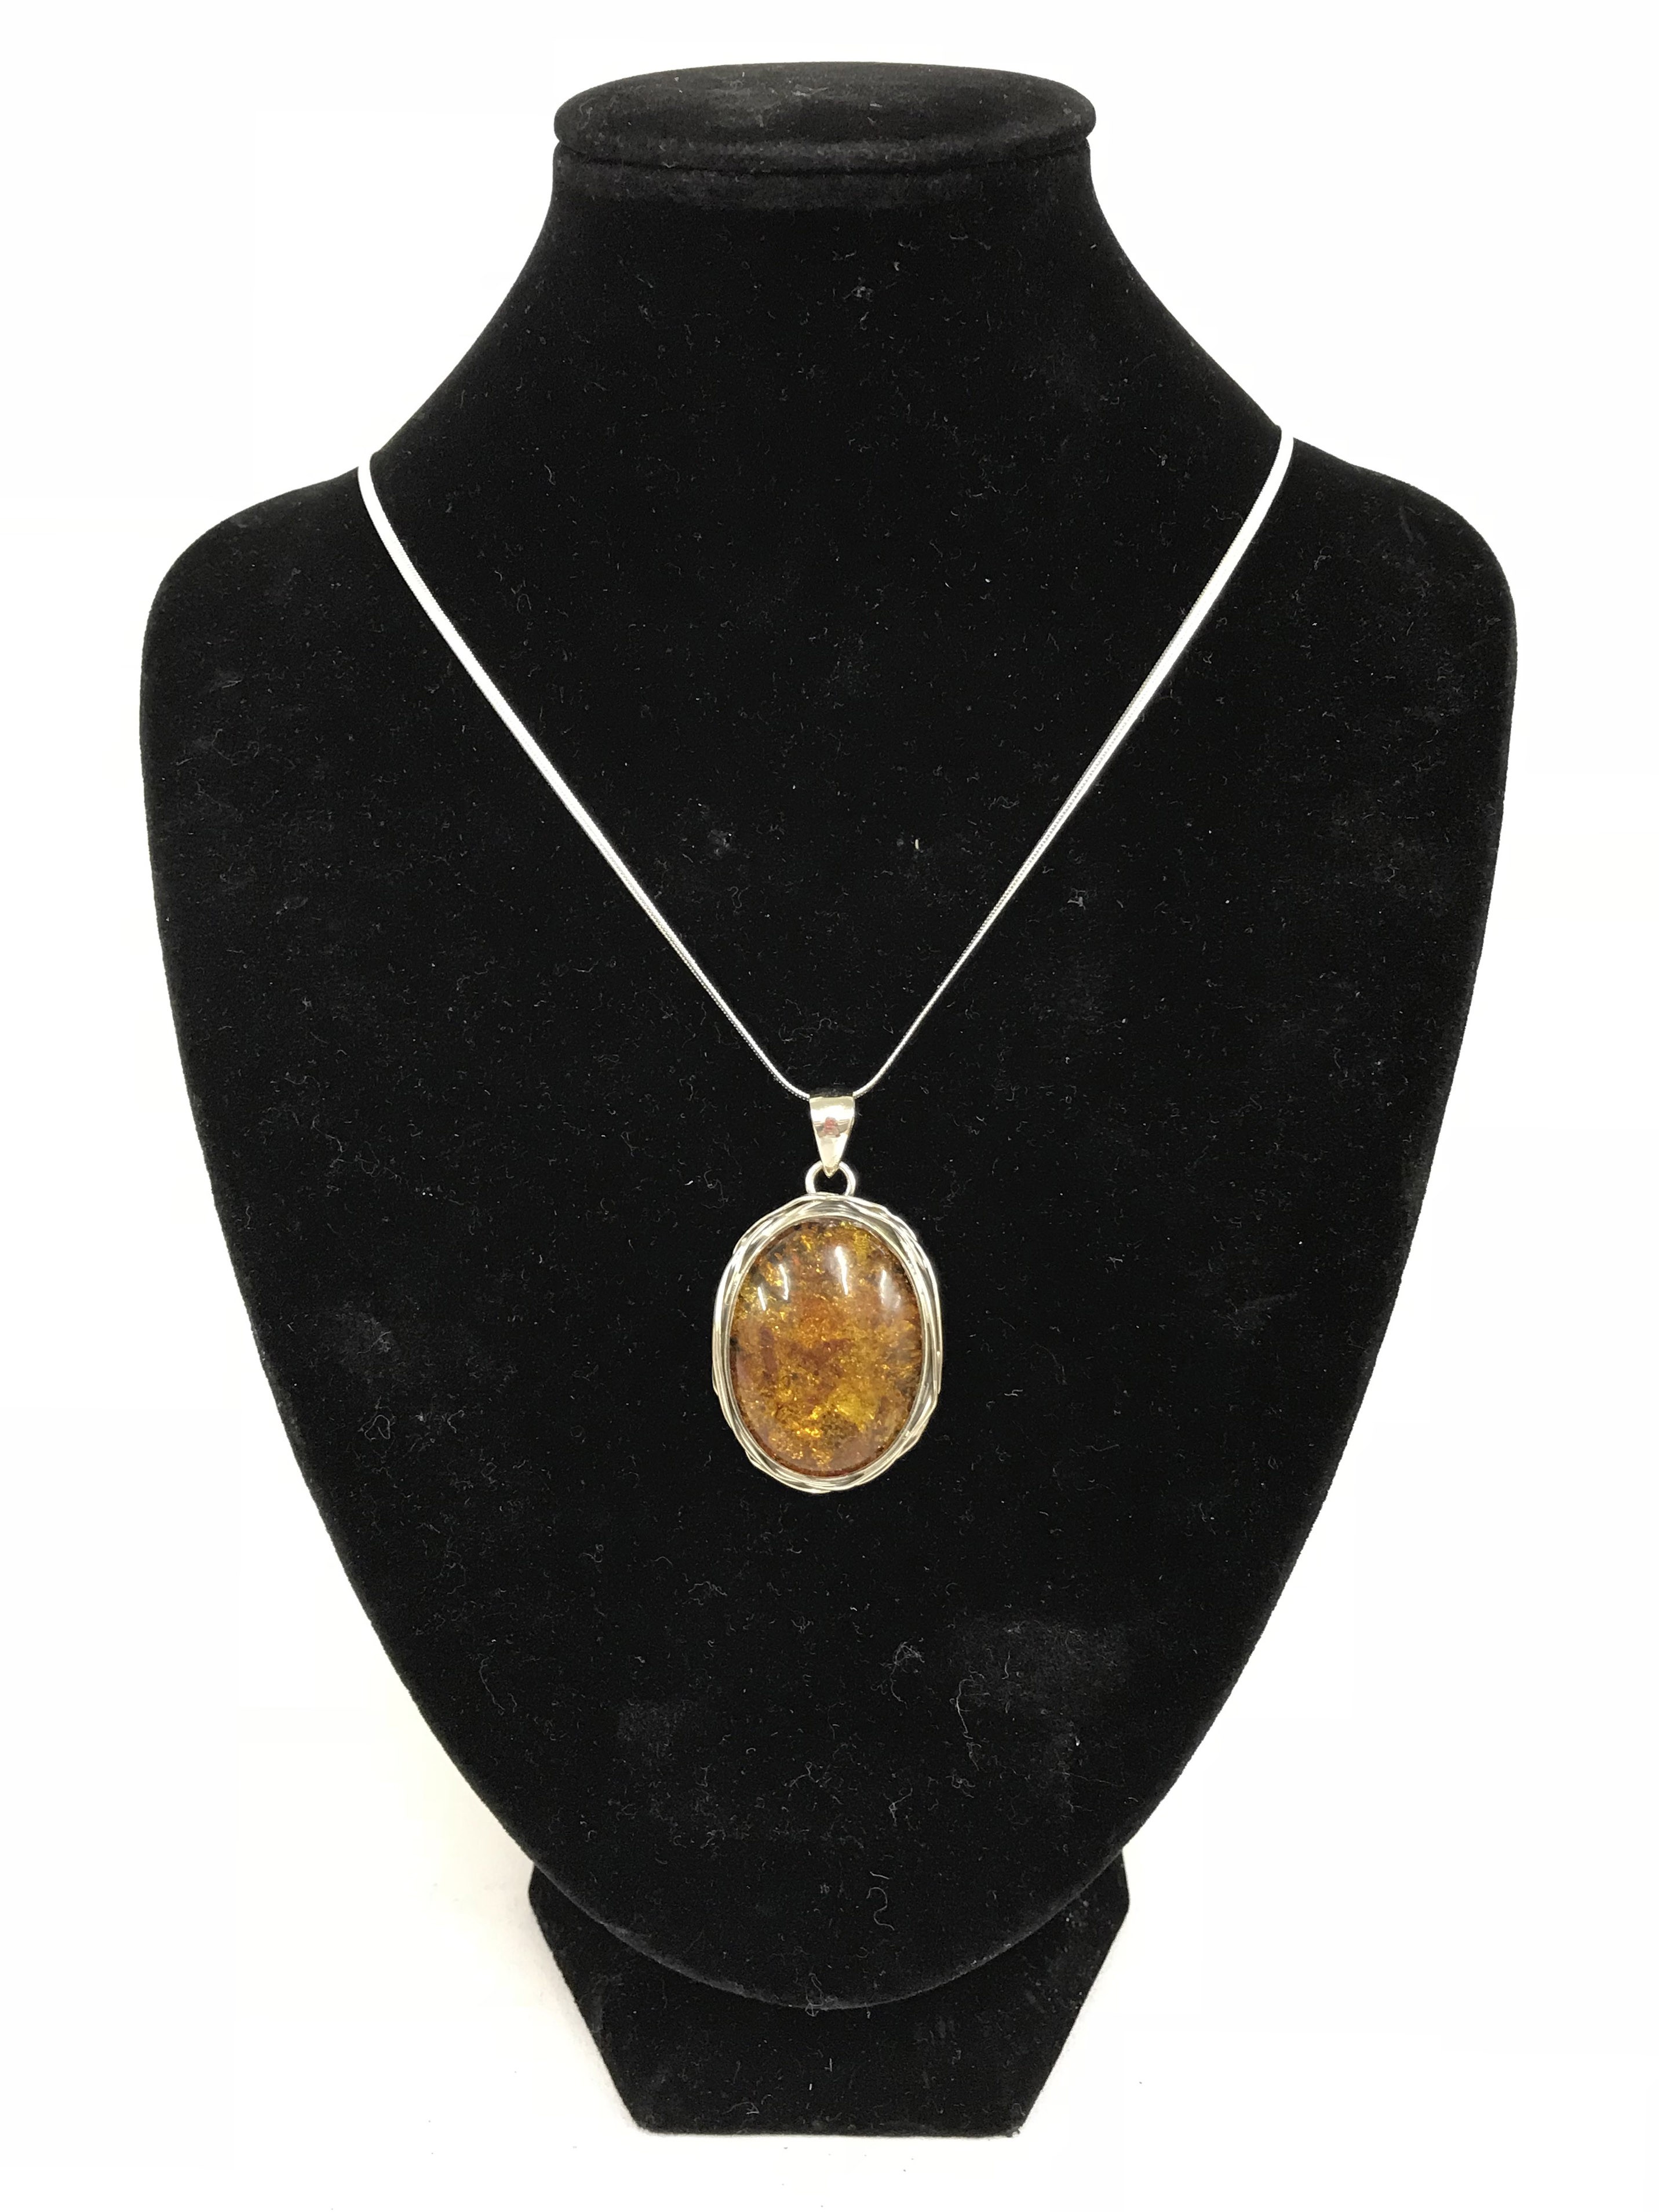 Sterling silver Baltic amber pendent - Image 3 of 3